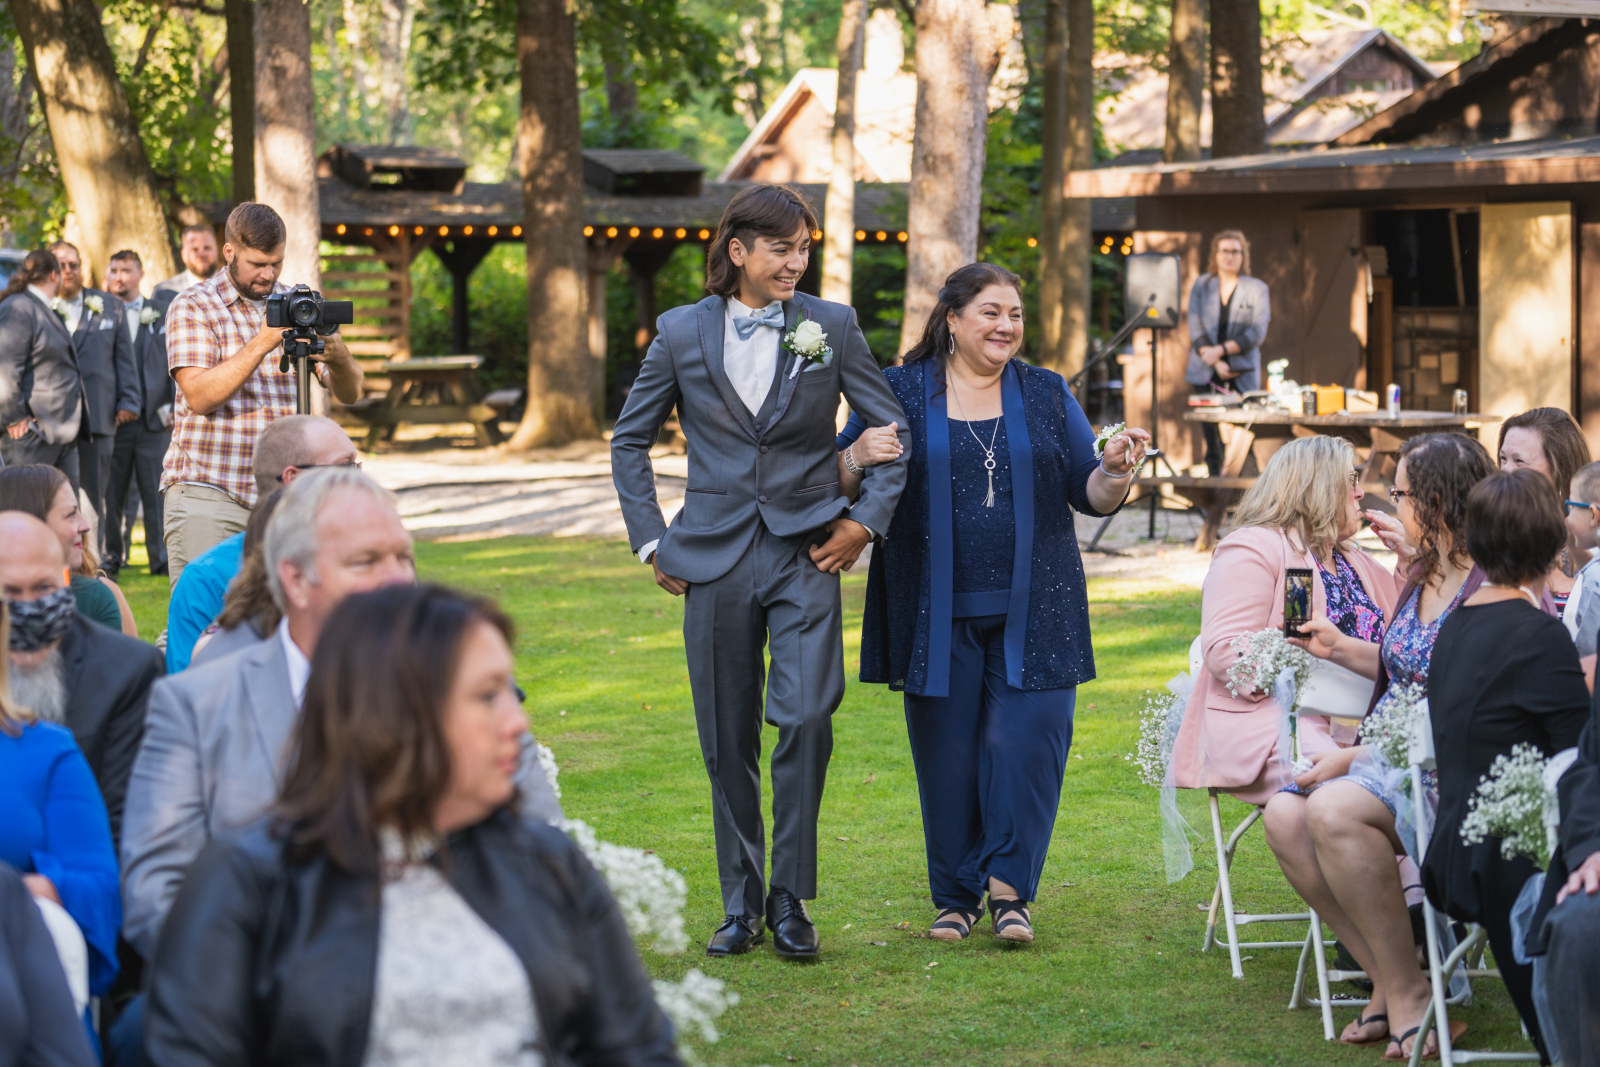 Groomsman and mother of the bride, bridal party processional, smile, green, trees, outdoor September wedding ceremony at Westfall Event Center